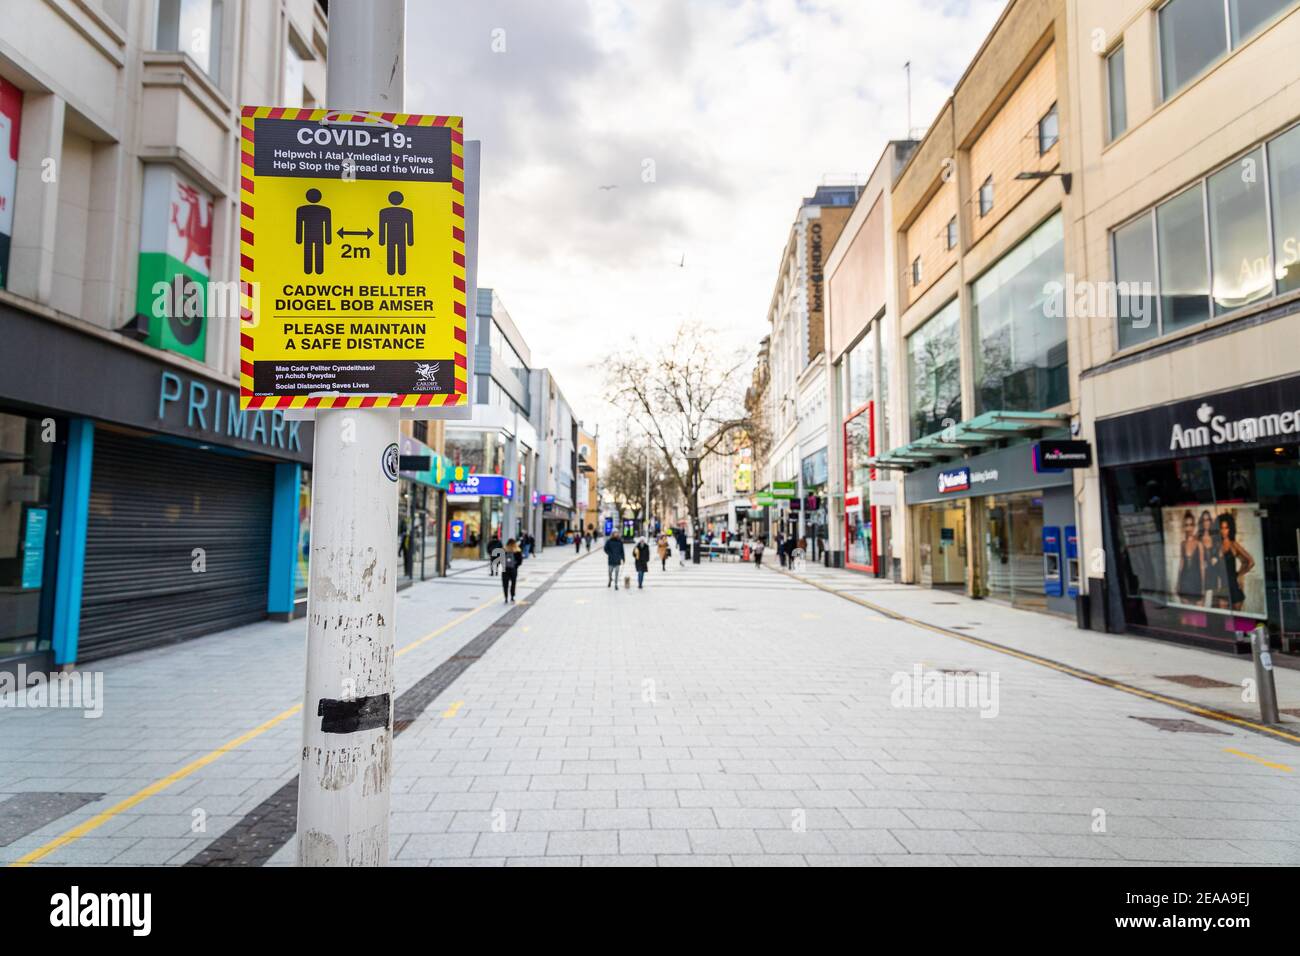 Cardiff, Wales - 8th February 2021:  The streets of Cardiff city centre, remain largely quiet, as the lockdown in Wales continues. Stock Photo